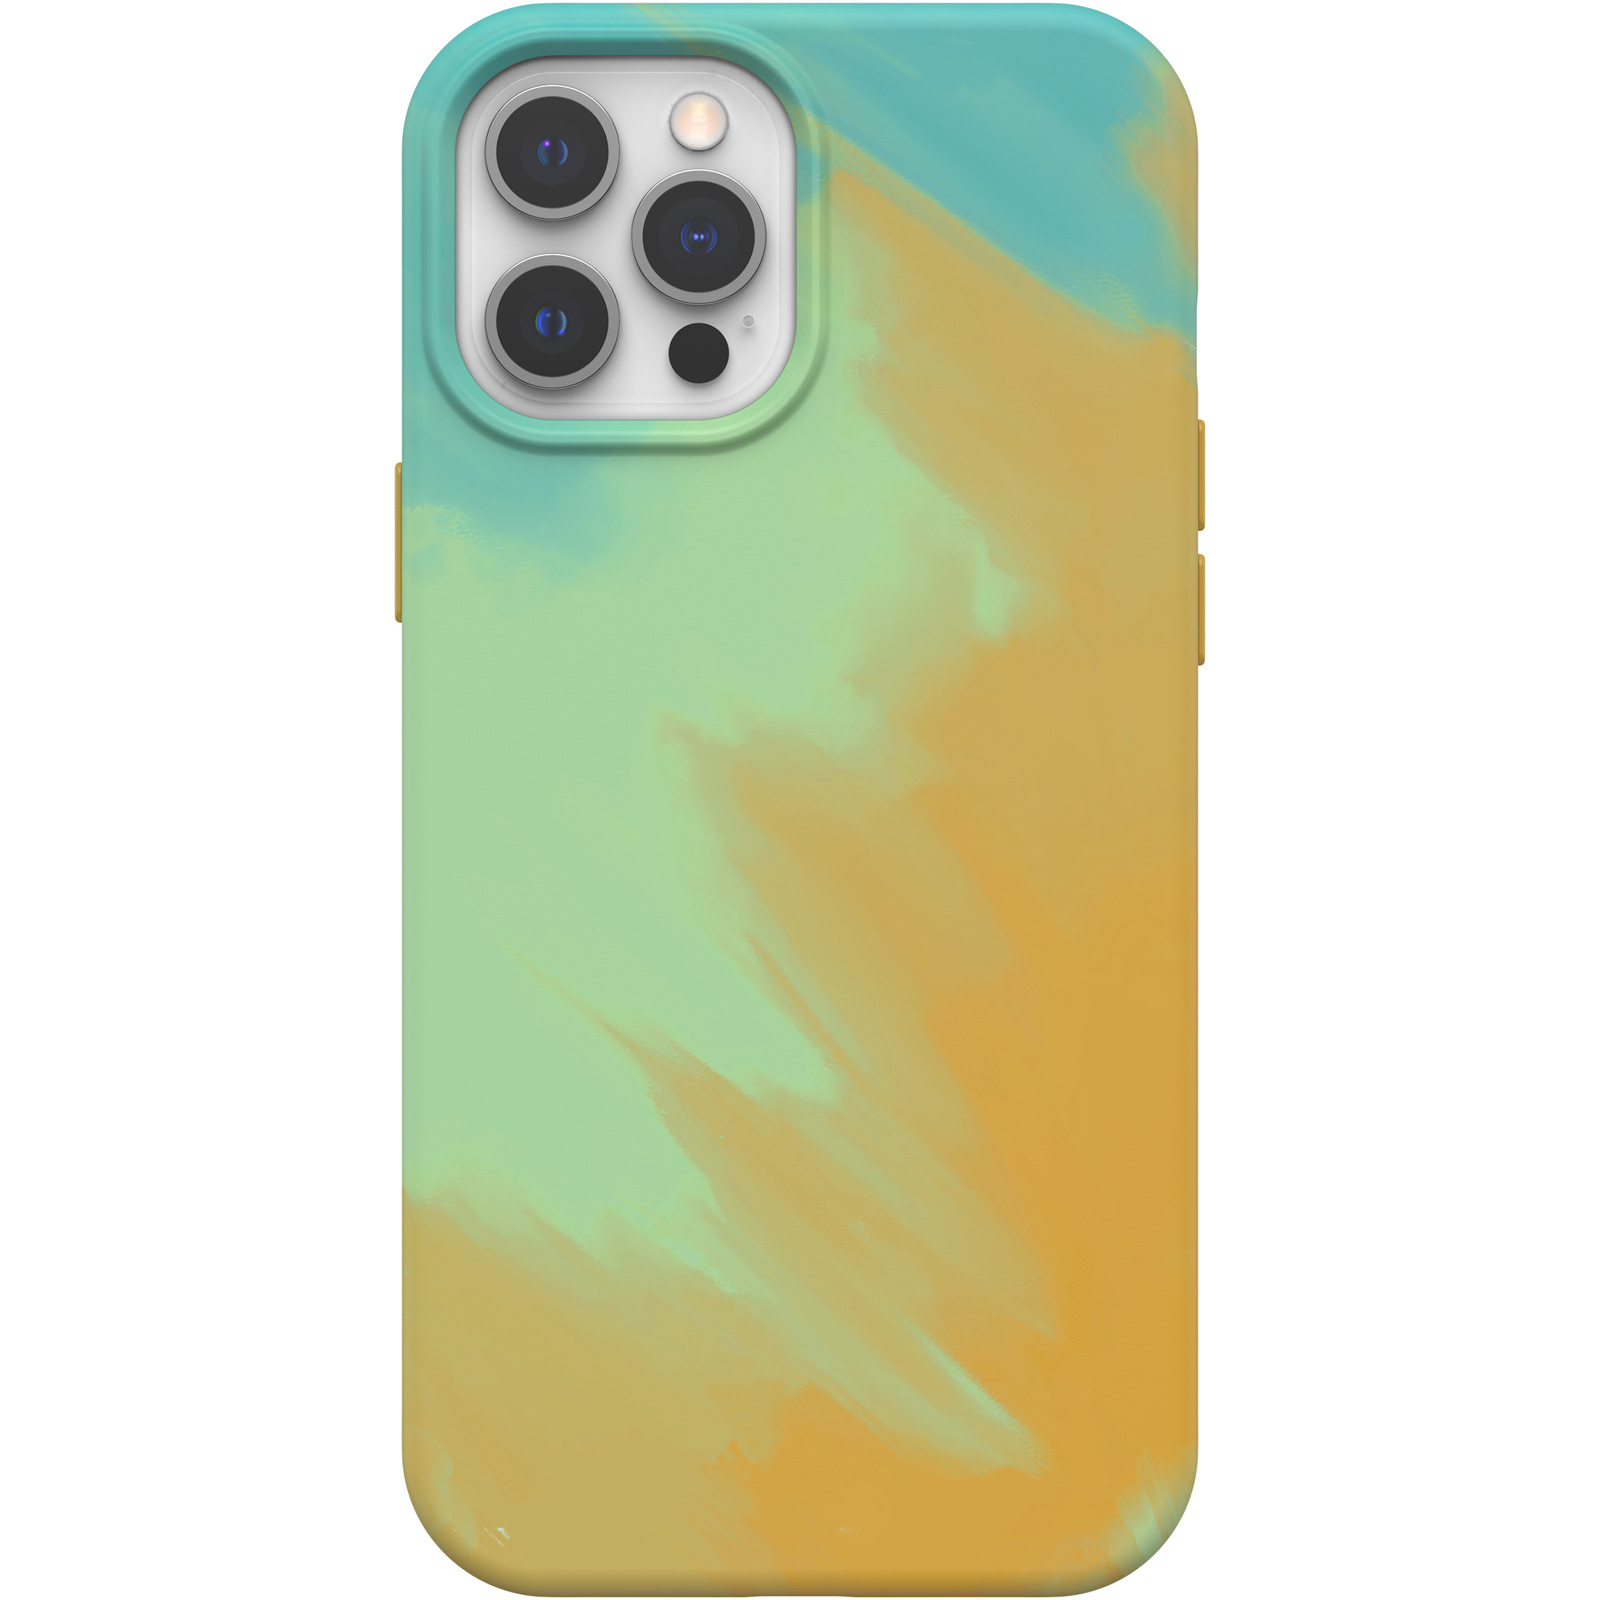 Cool iPhone 12 Pro Max Case with Luminous Colors and a Sculpted Pattern ...